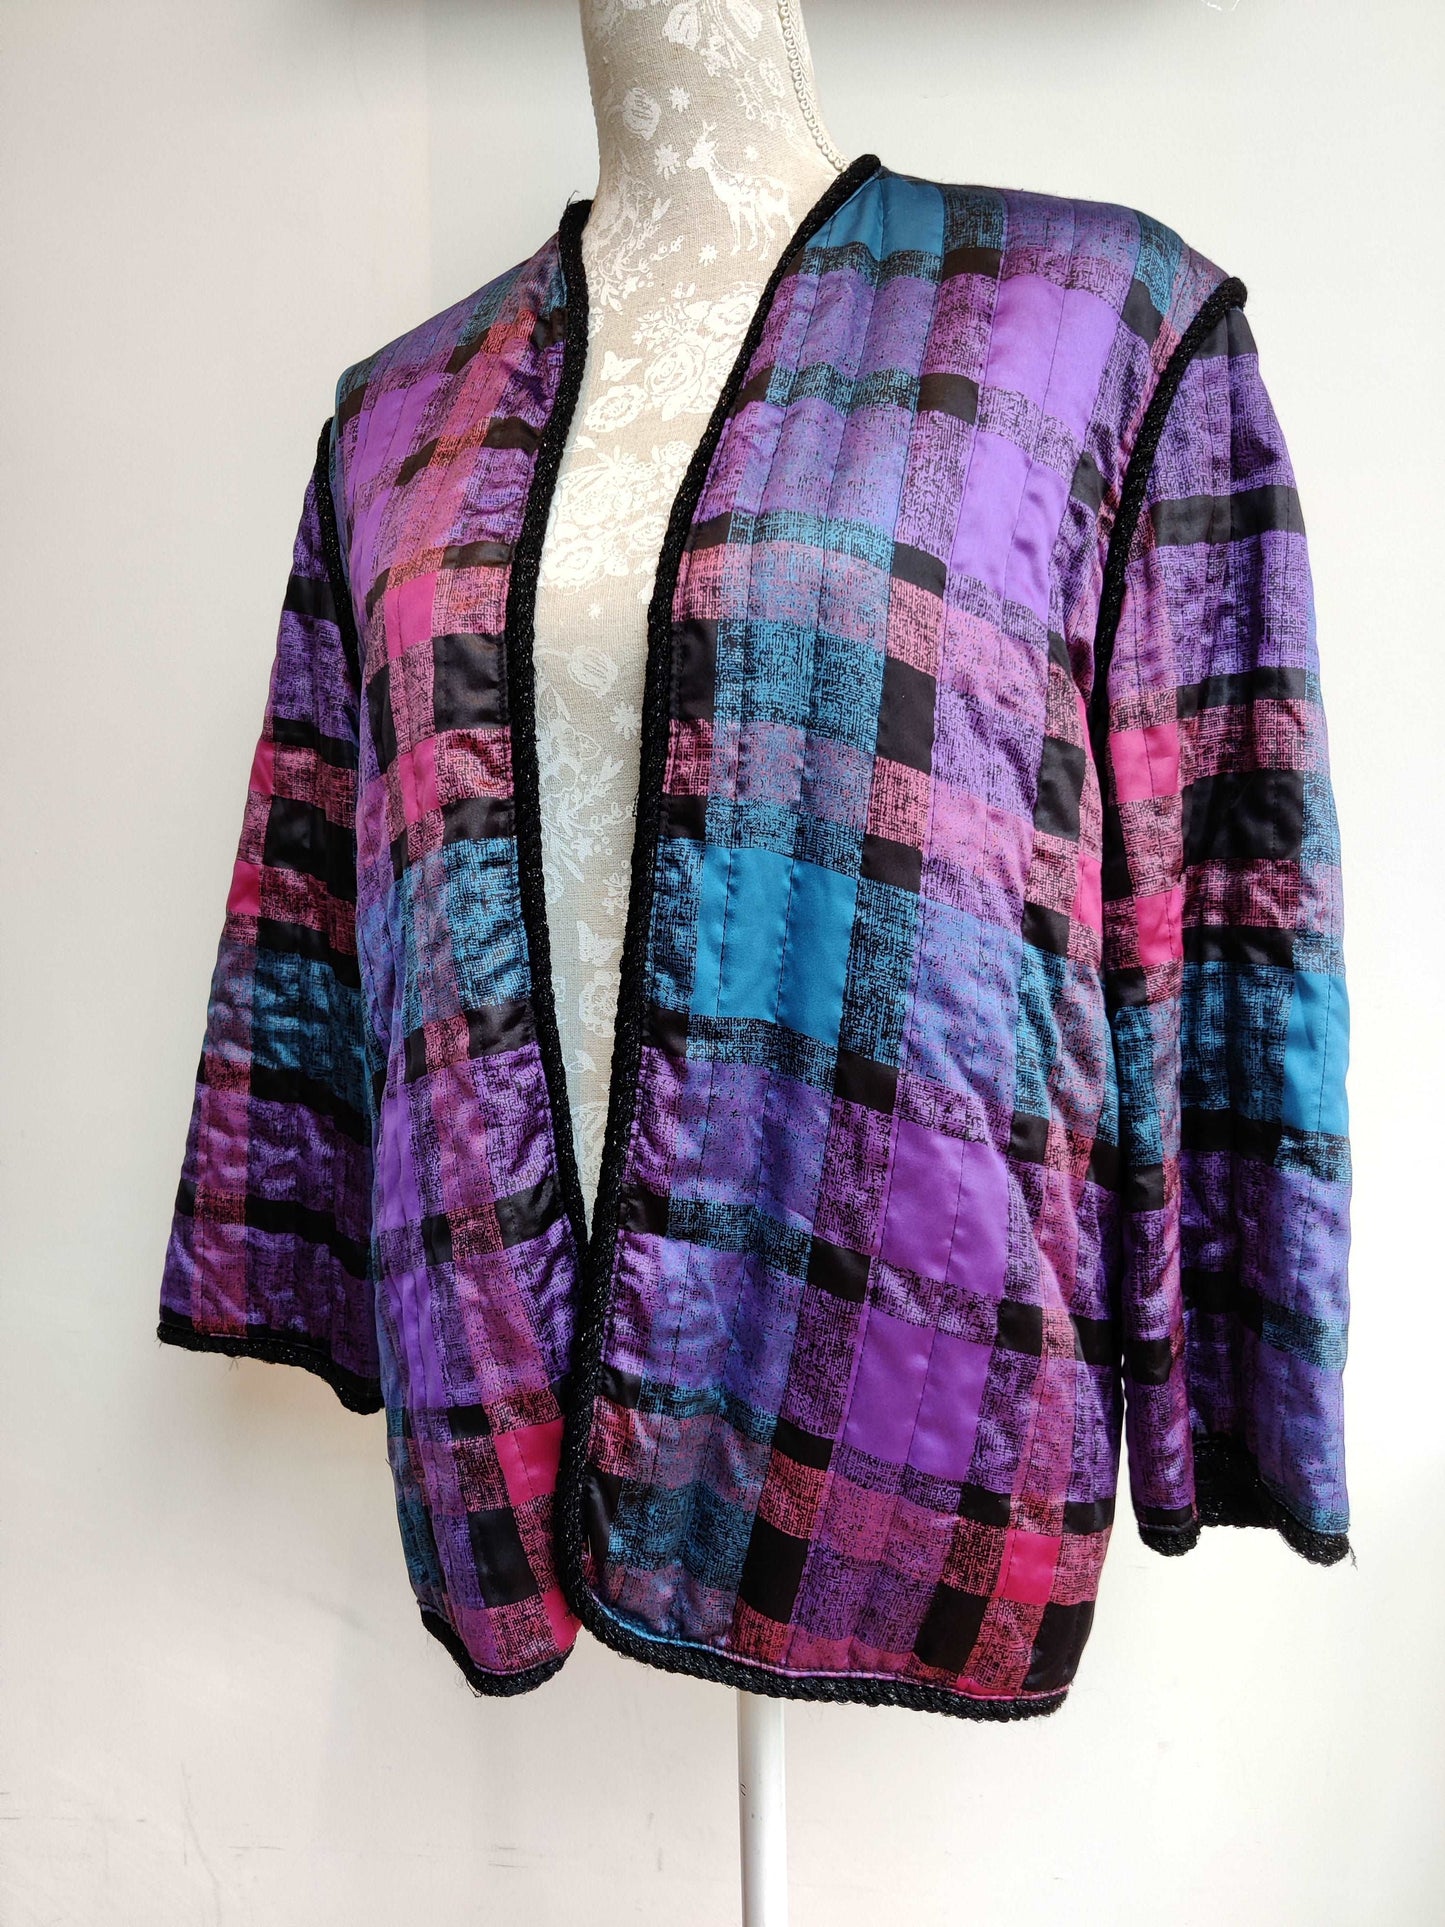 80s quilted jacket by Frank Usher - 10-14